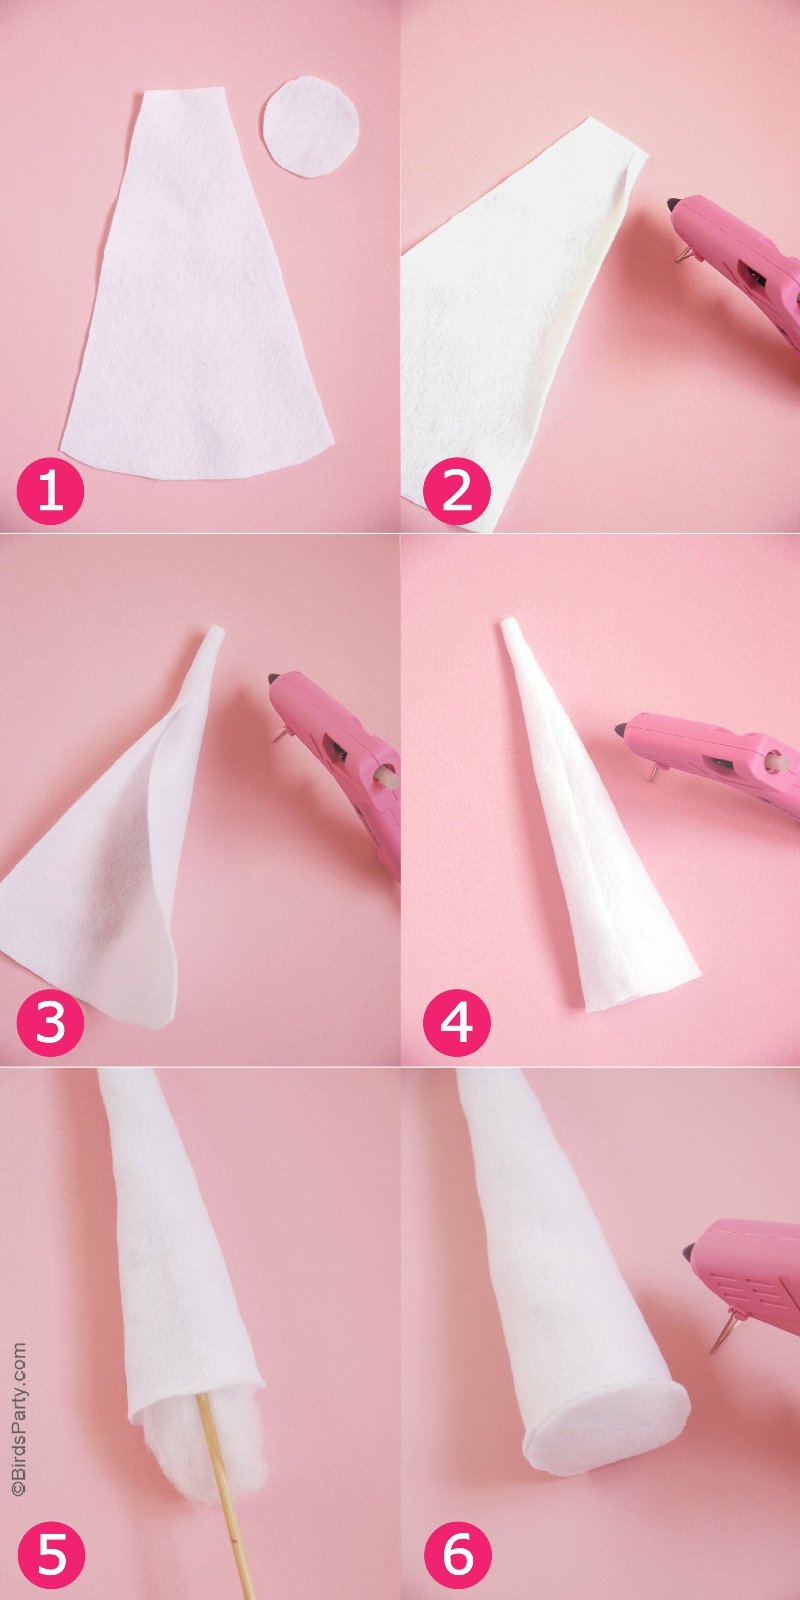 DIY Unicorn Party Headbands - learn to craft these easy accessories for birthday celebrations, Halloween costume or a party photo booth prop! by BirdsParty.com @birdsparty